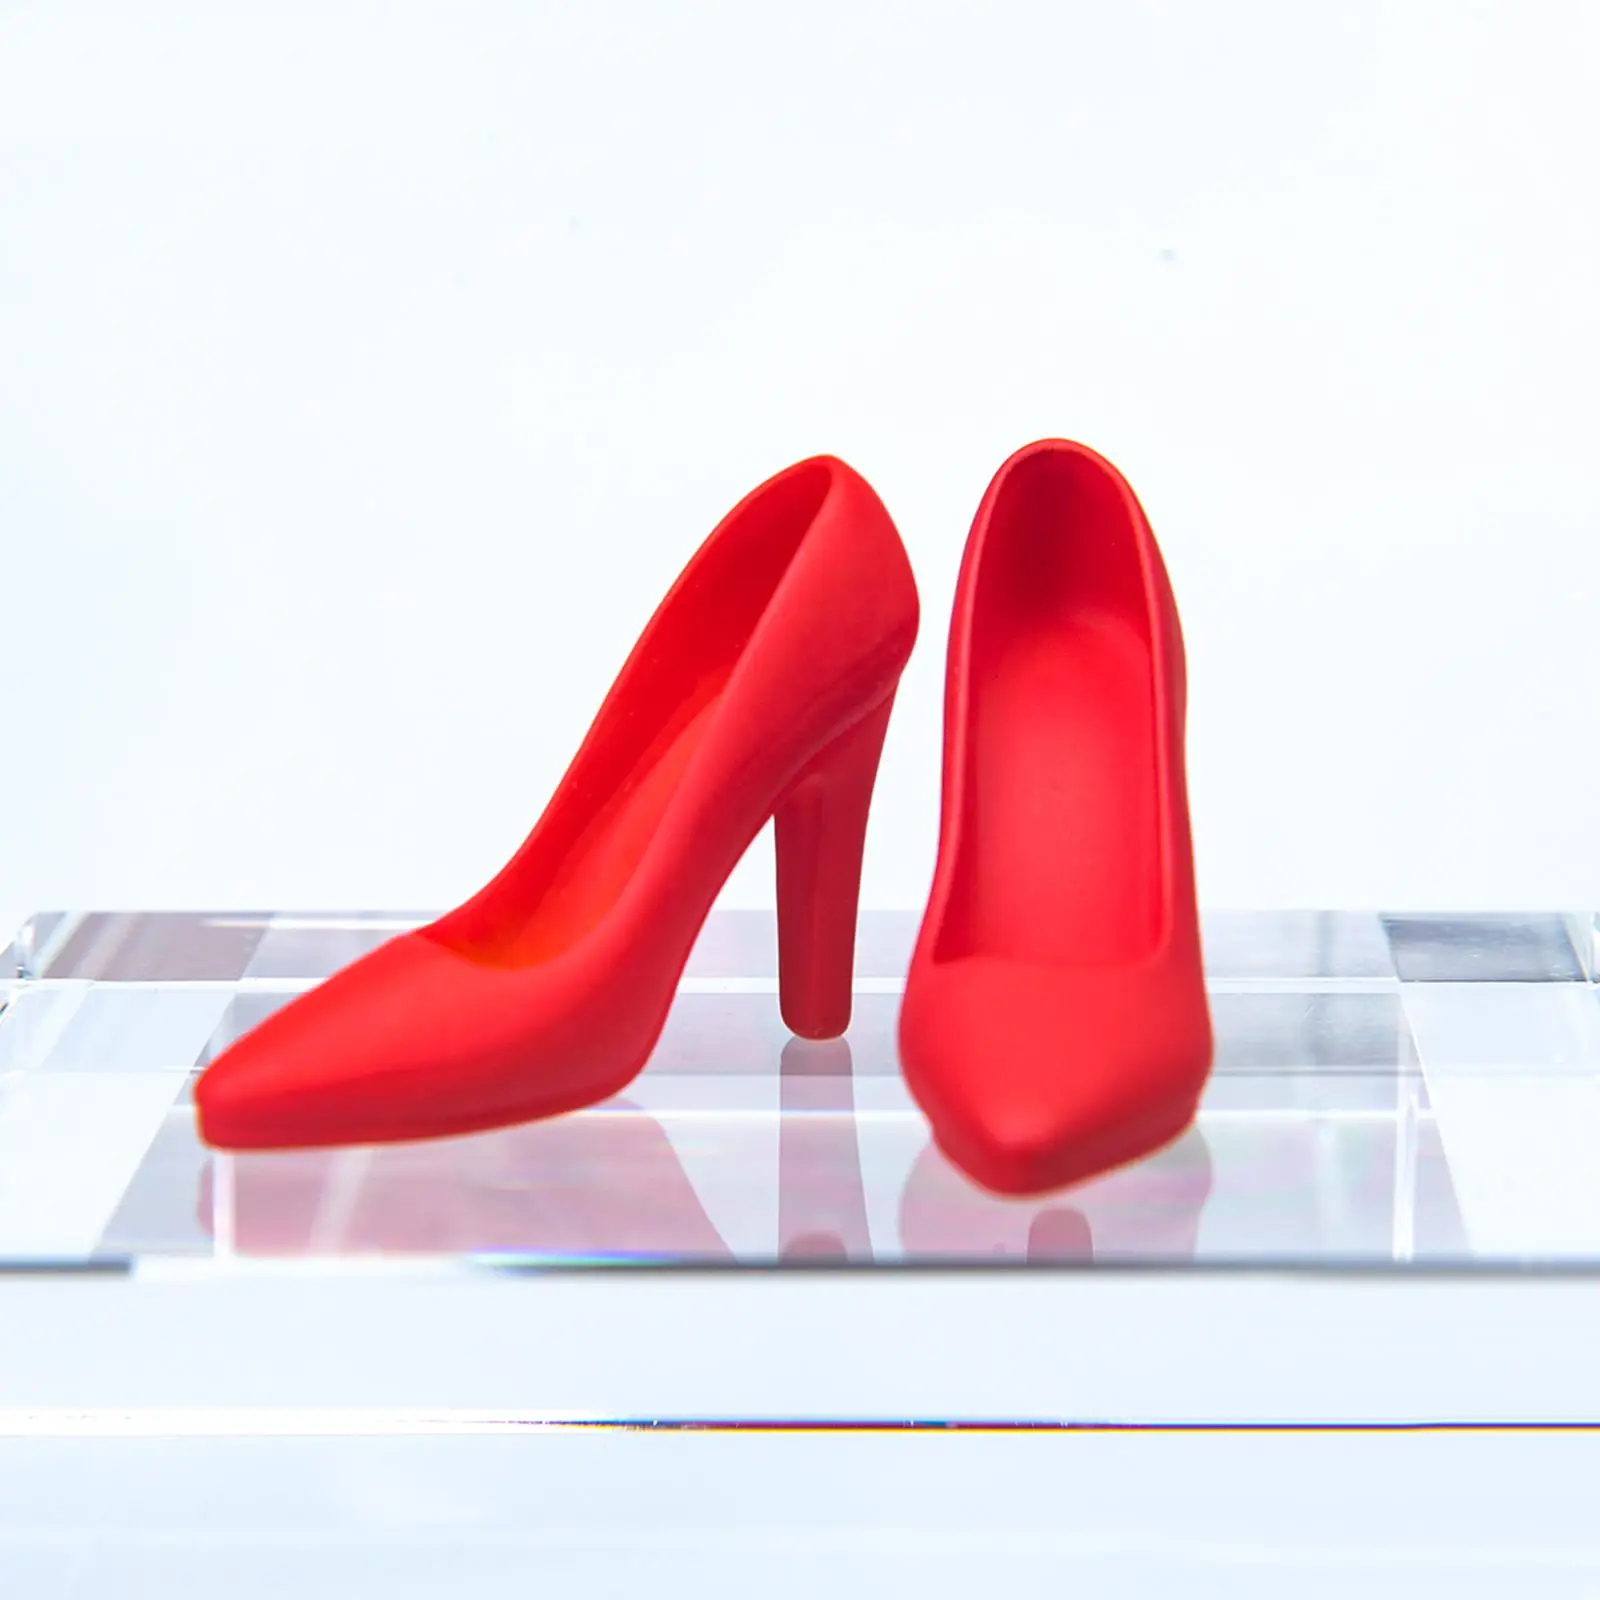 1:6 Scale, High Heel Shoes Female Shoes, Female High Heel Shoes, for 12`` Action Figures